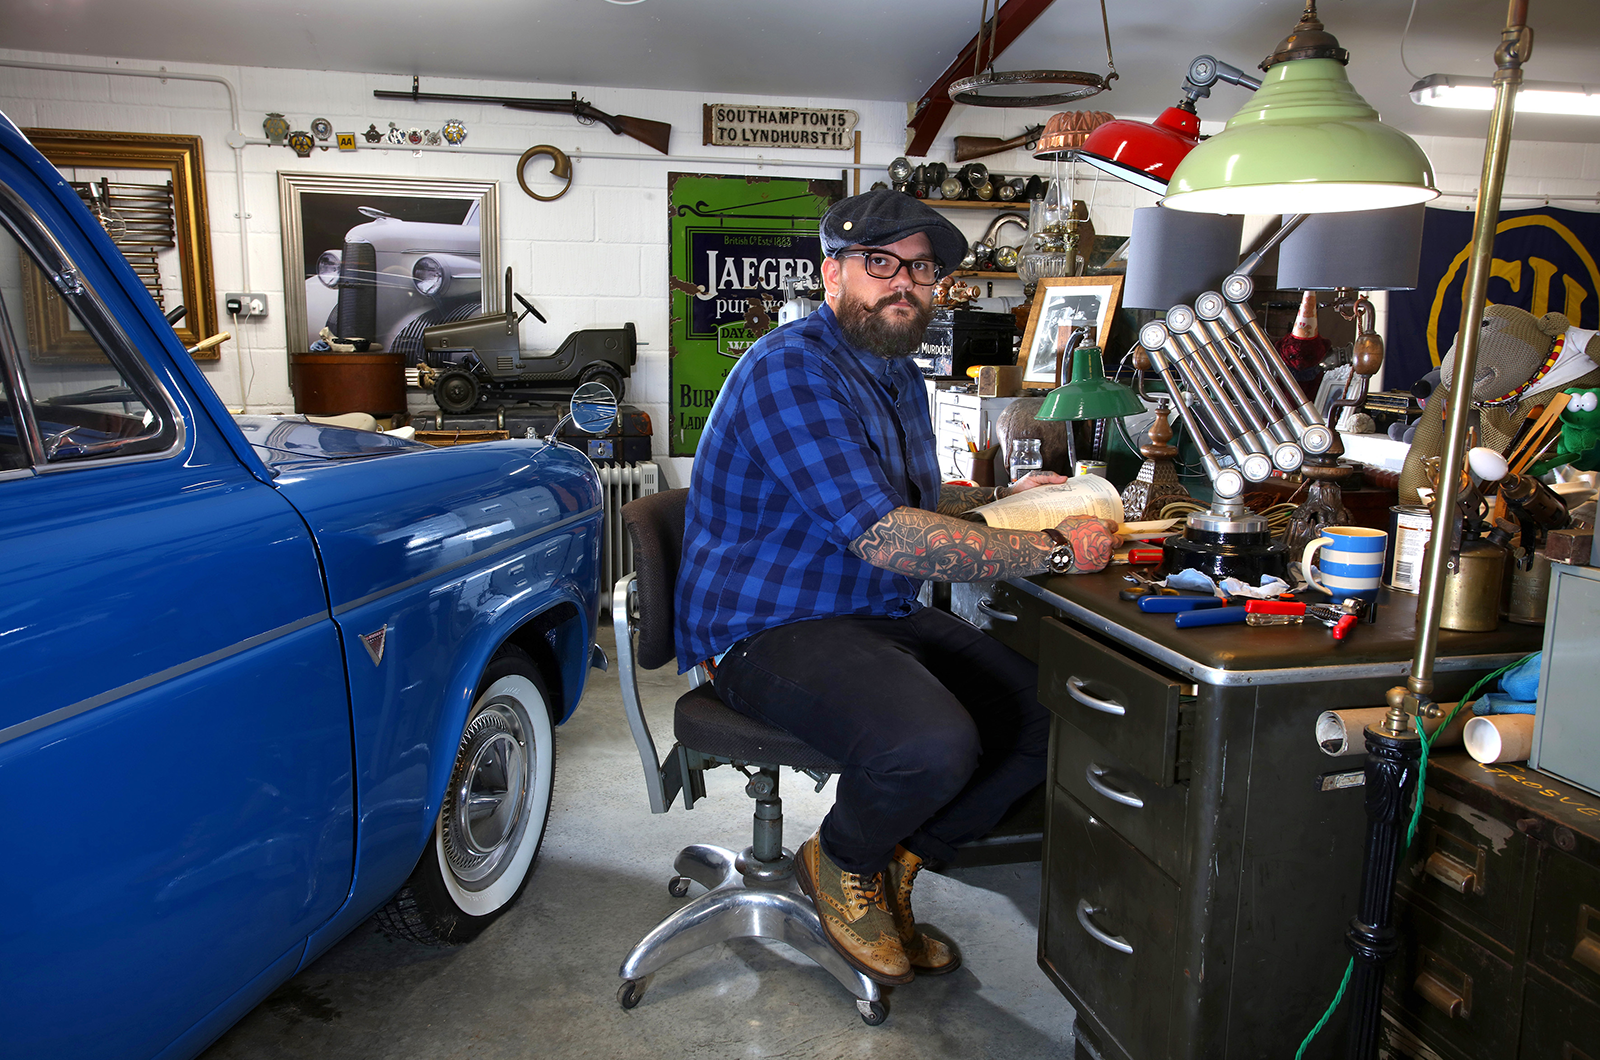 Classic & Sports Car – Also in my garage: American design icons and pedal cars